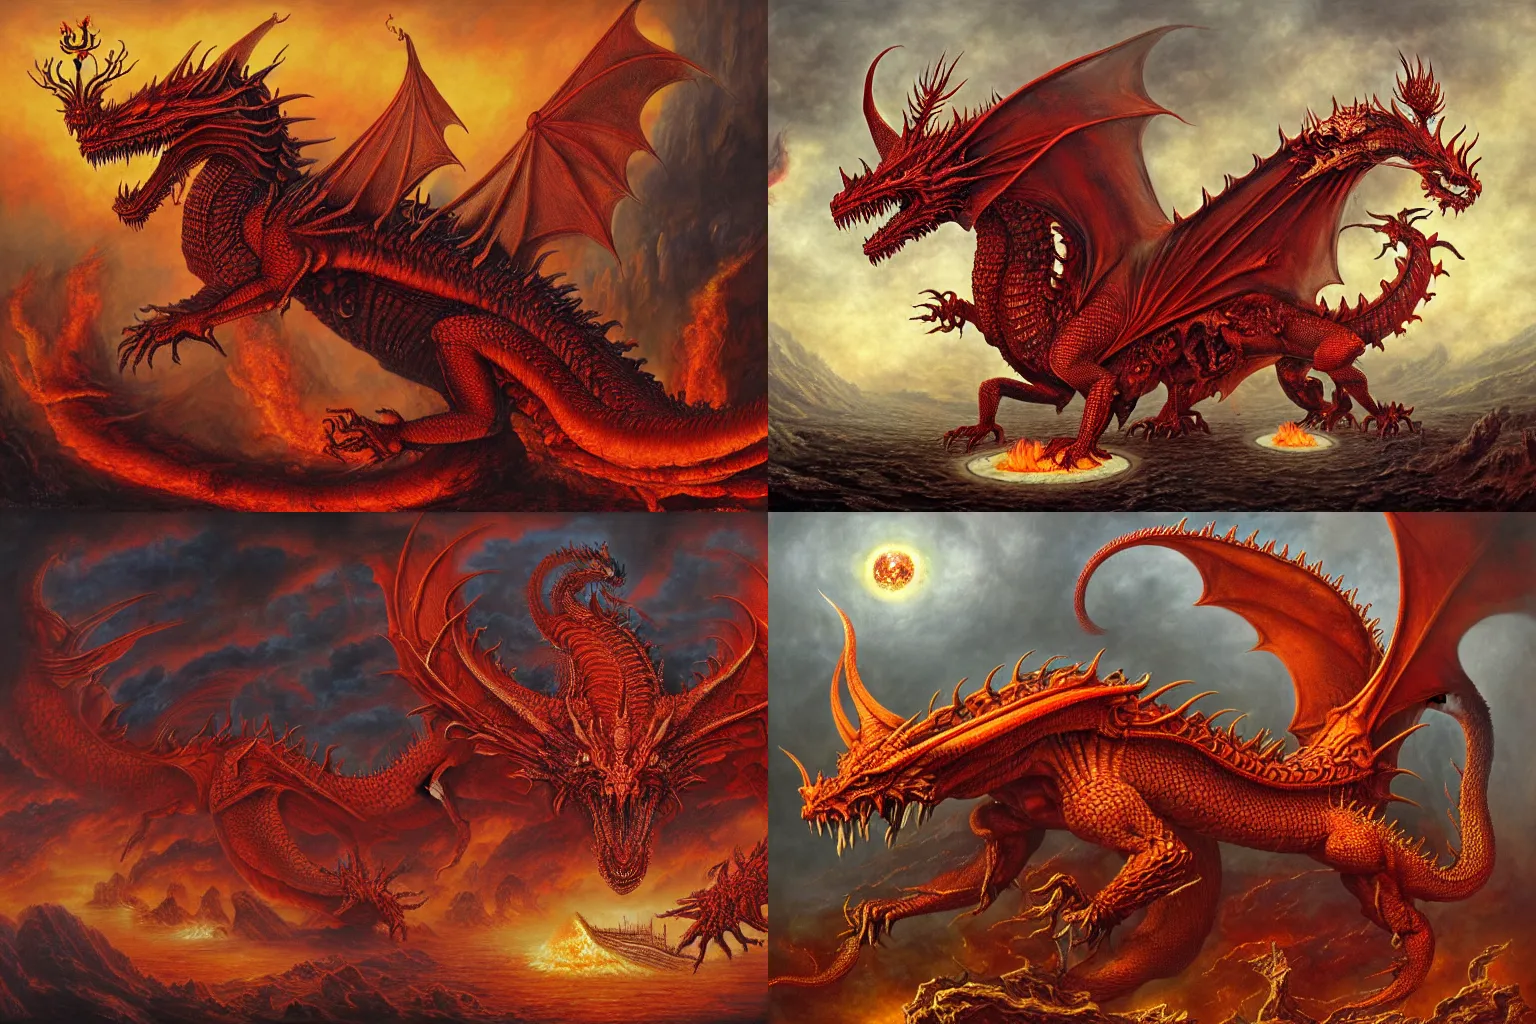 Prompt: a great fiery red dragon with 7 heads wearing crowns, and 10 horns, detailed, intricate, matte painting by Mariusz Lewandowski, Giger and Jacek Yerka